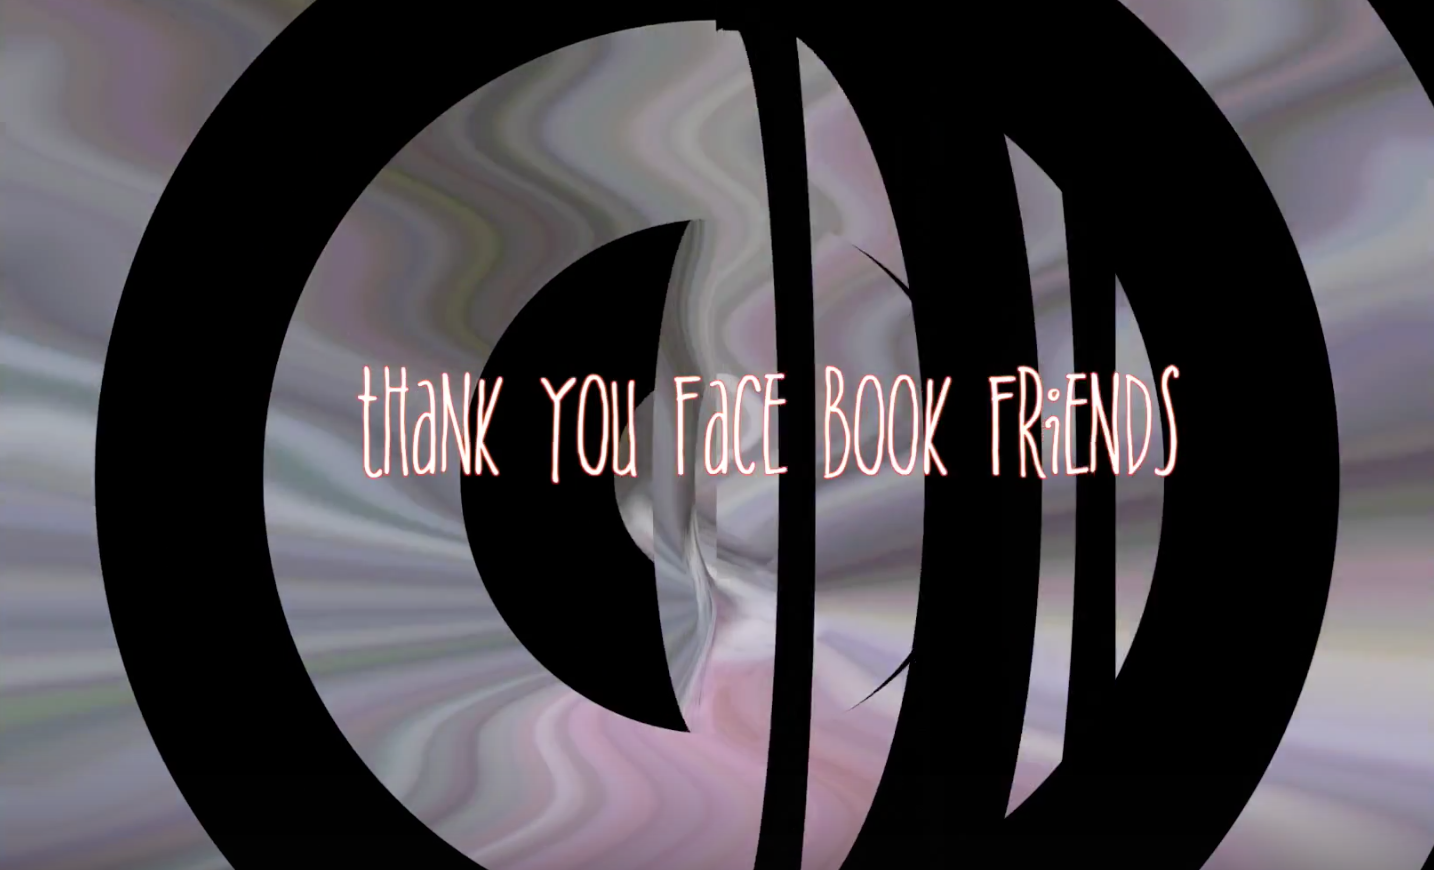 FB Friends – Thank you!